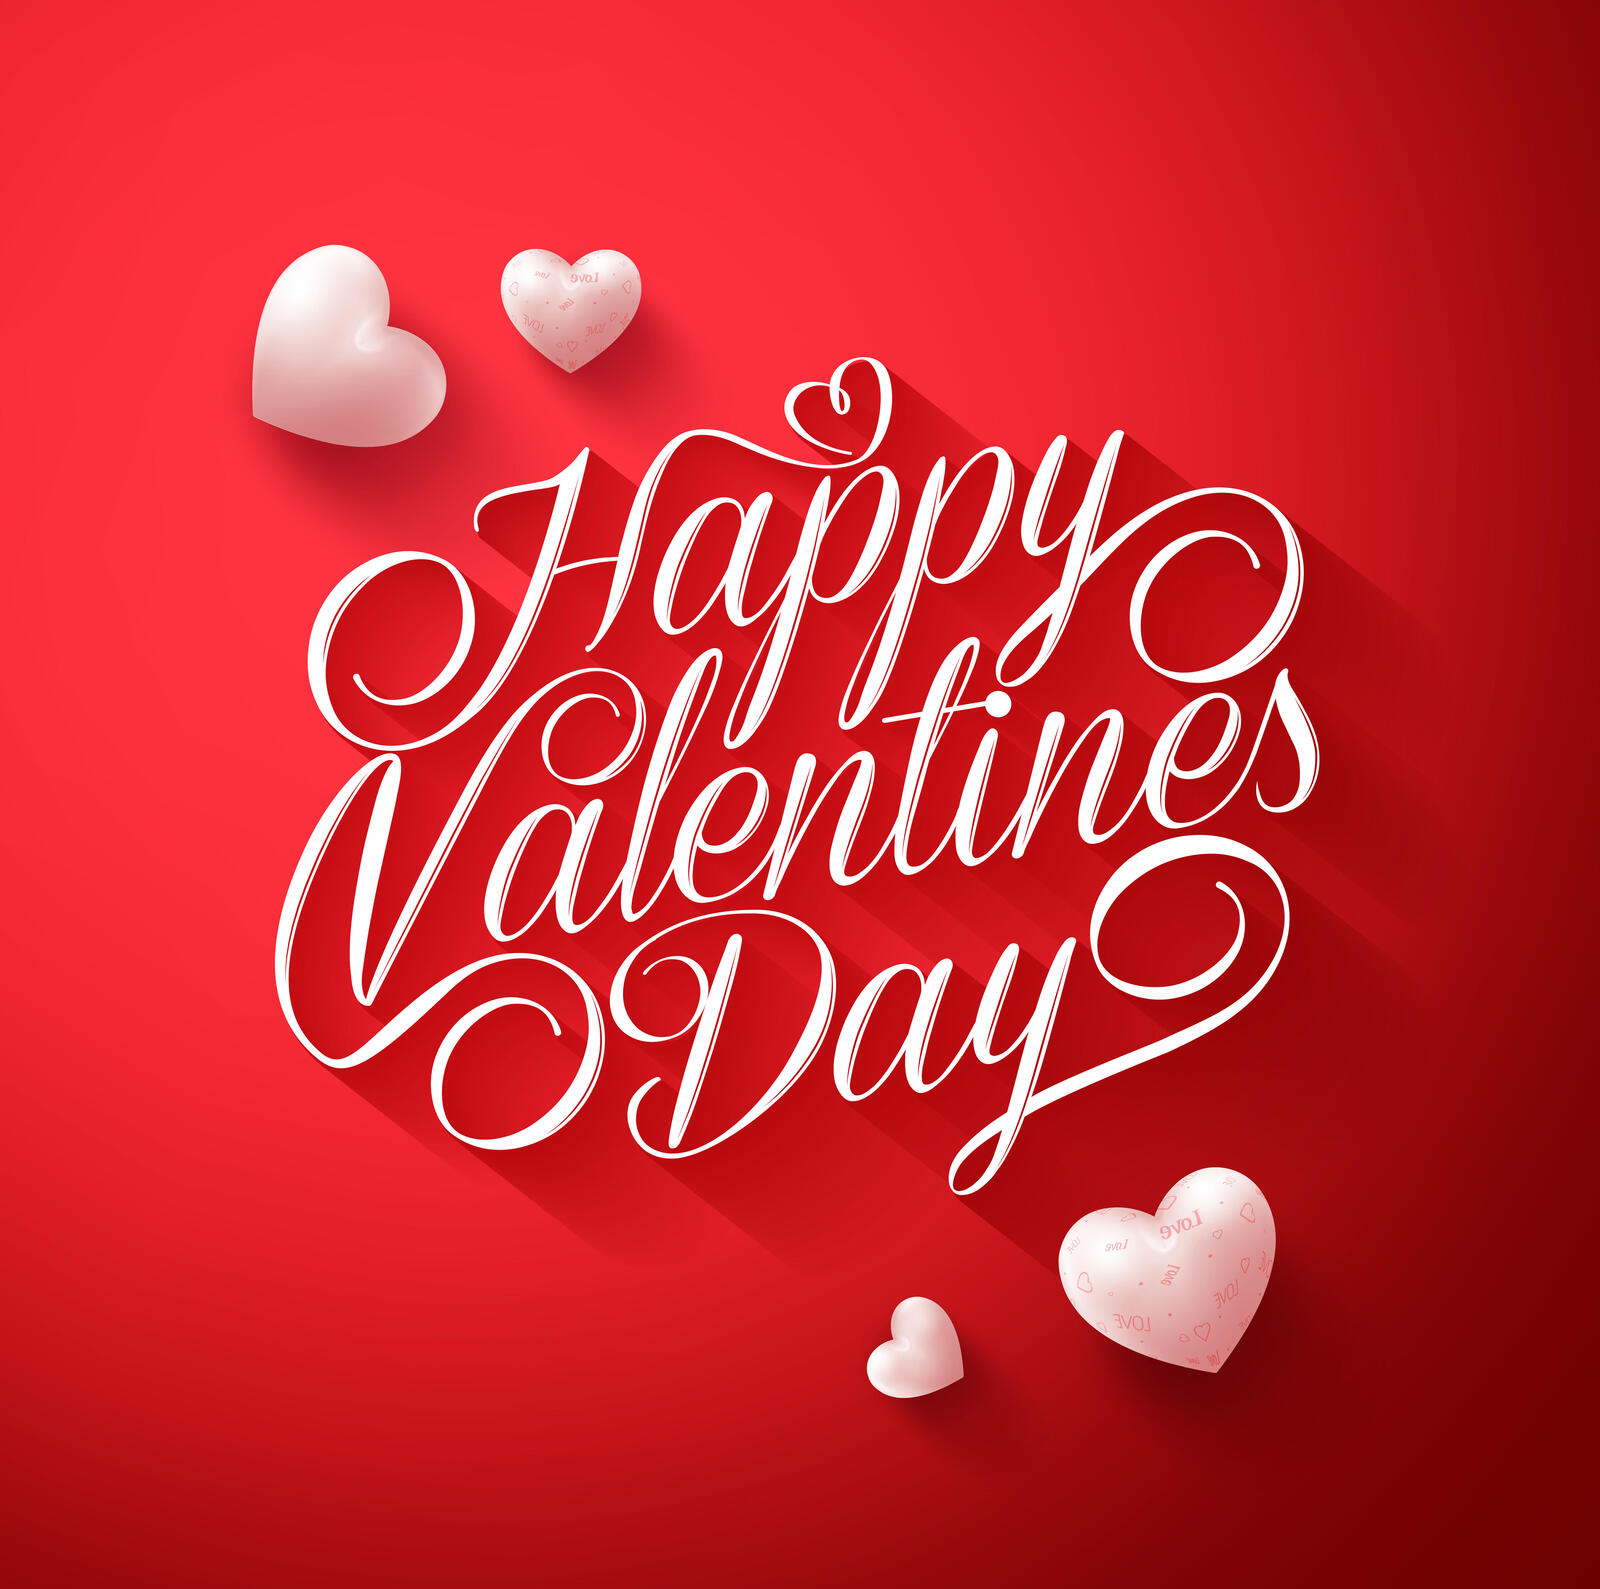 Wallpapers hearts romantic hearts Valentine day on the desktop